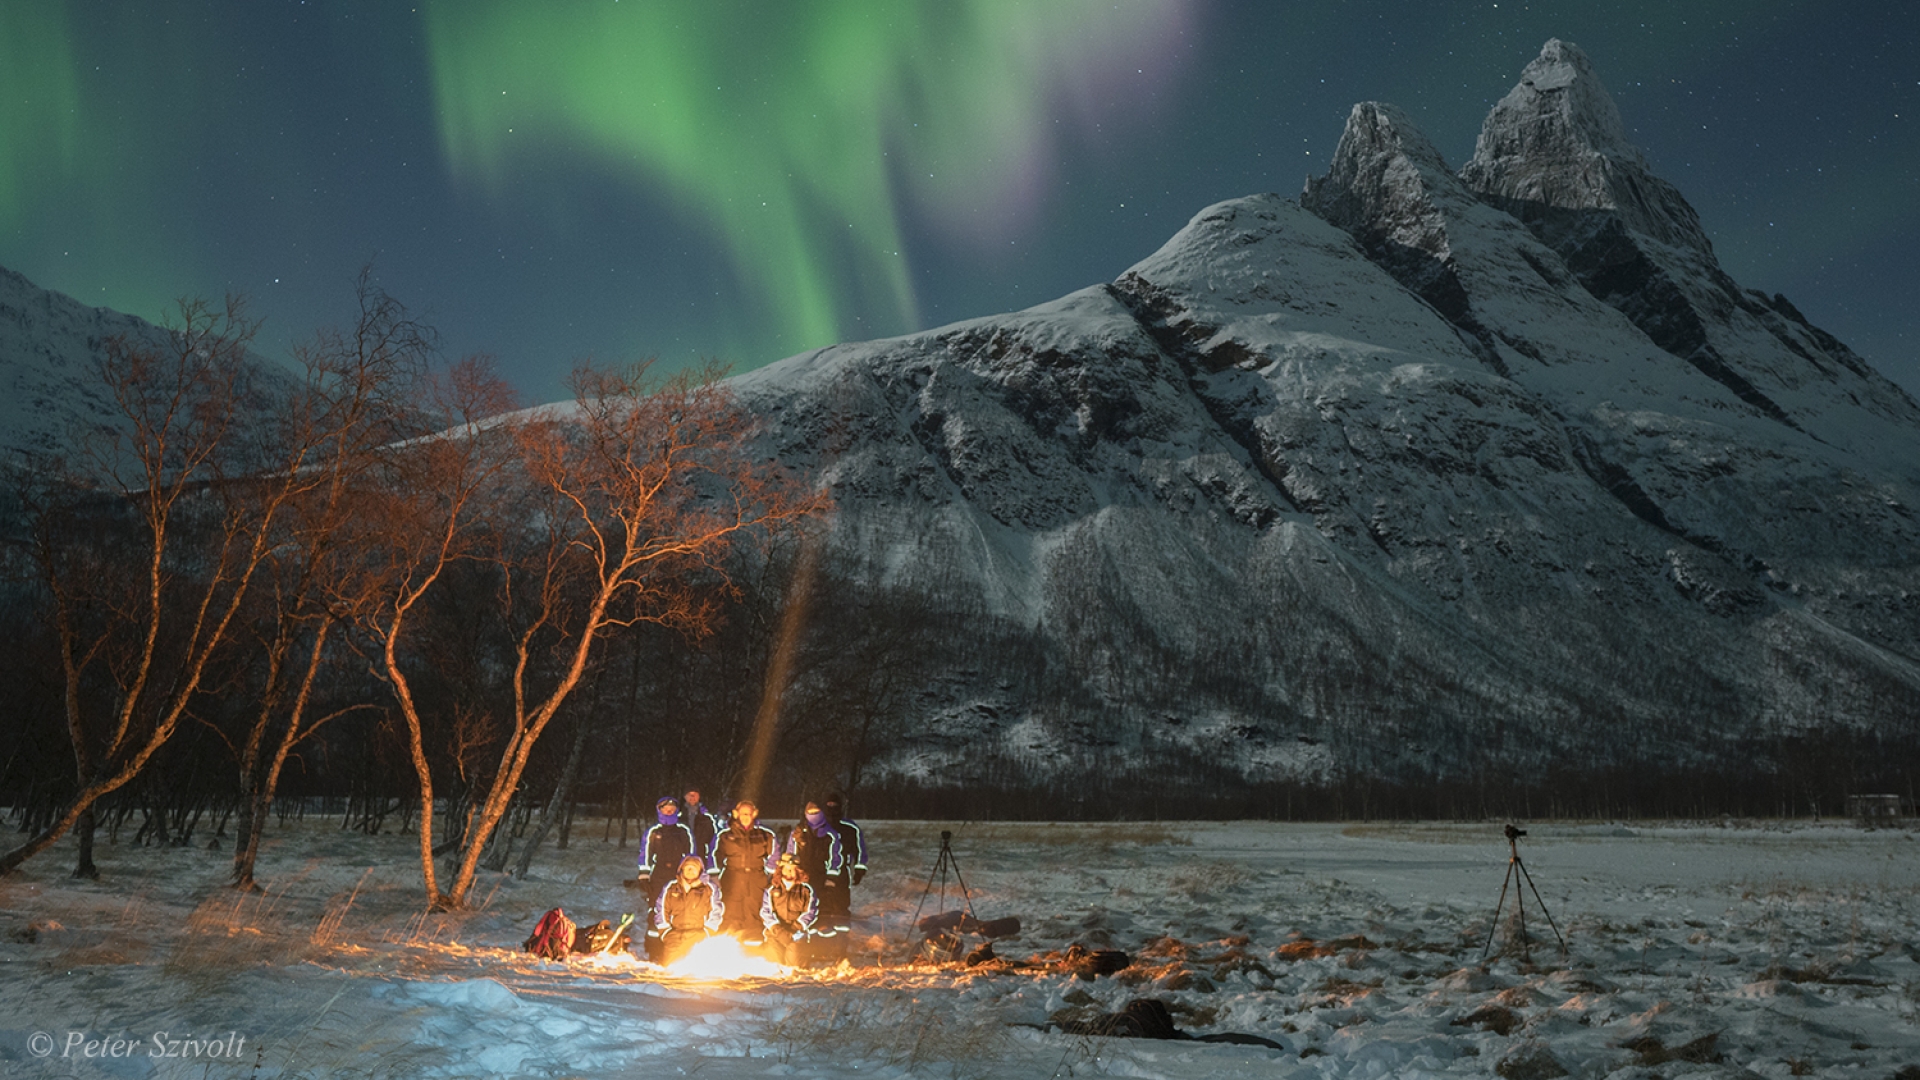 People gathered around bonfire under the Northern Lights